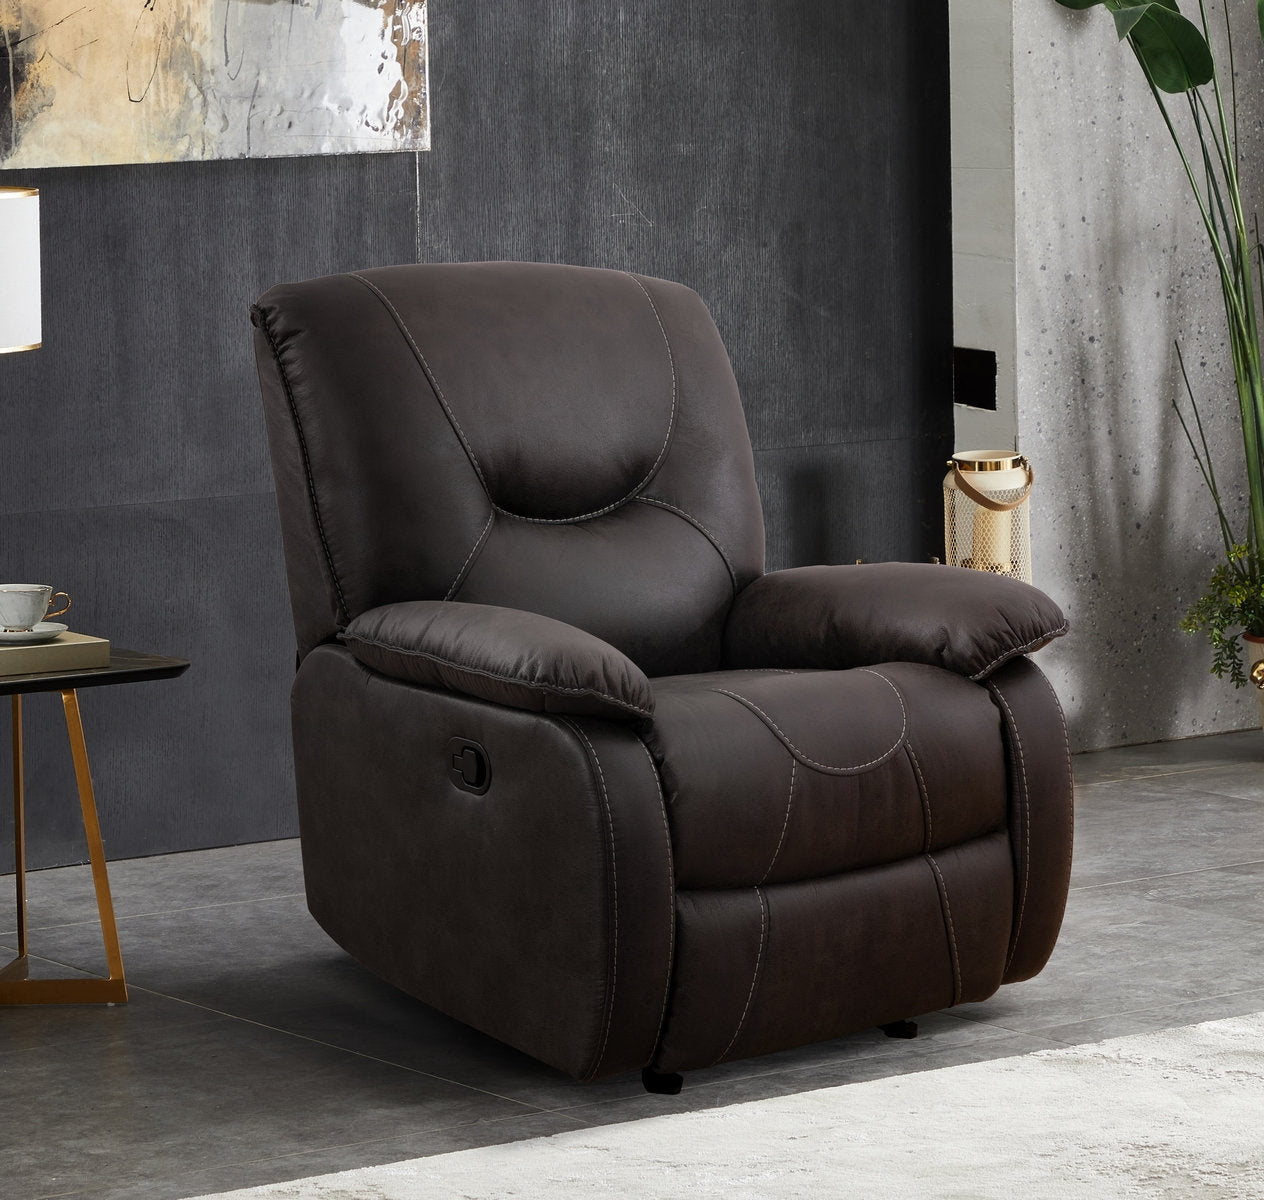 Grey Elephant Skin Fabric Recliner Chair with Solid Hardwood Frame